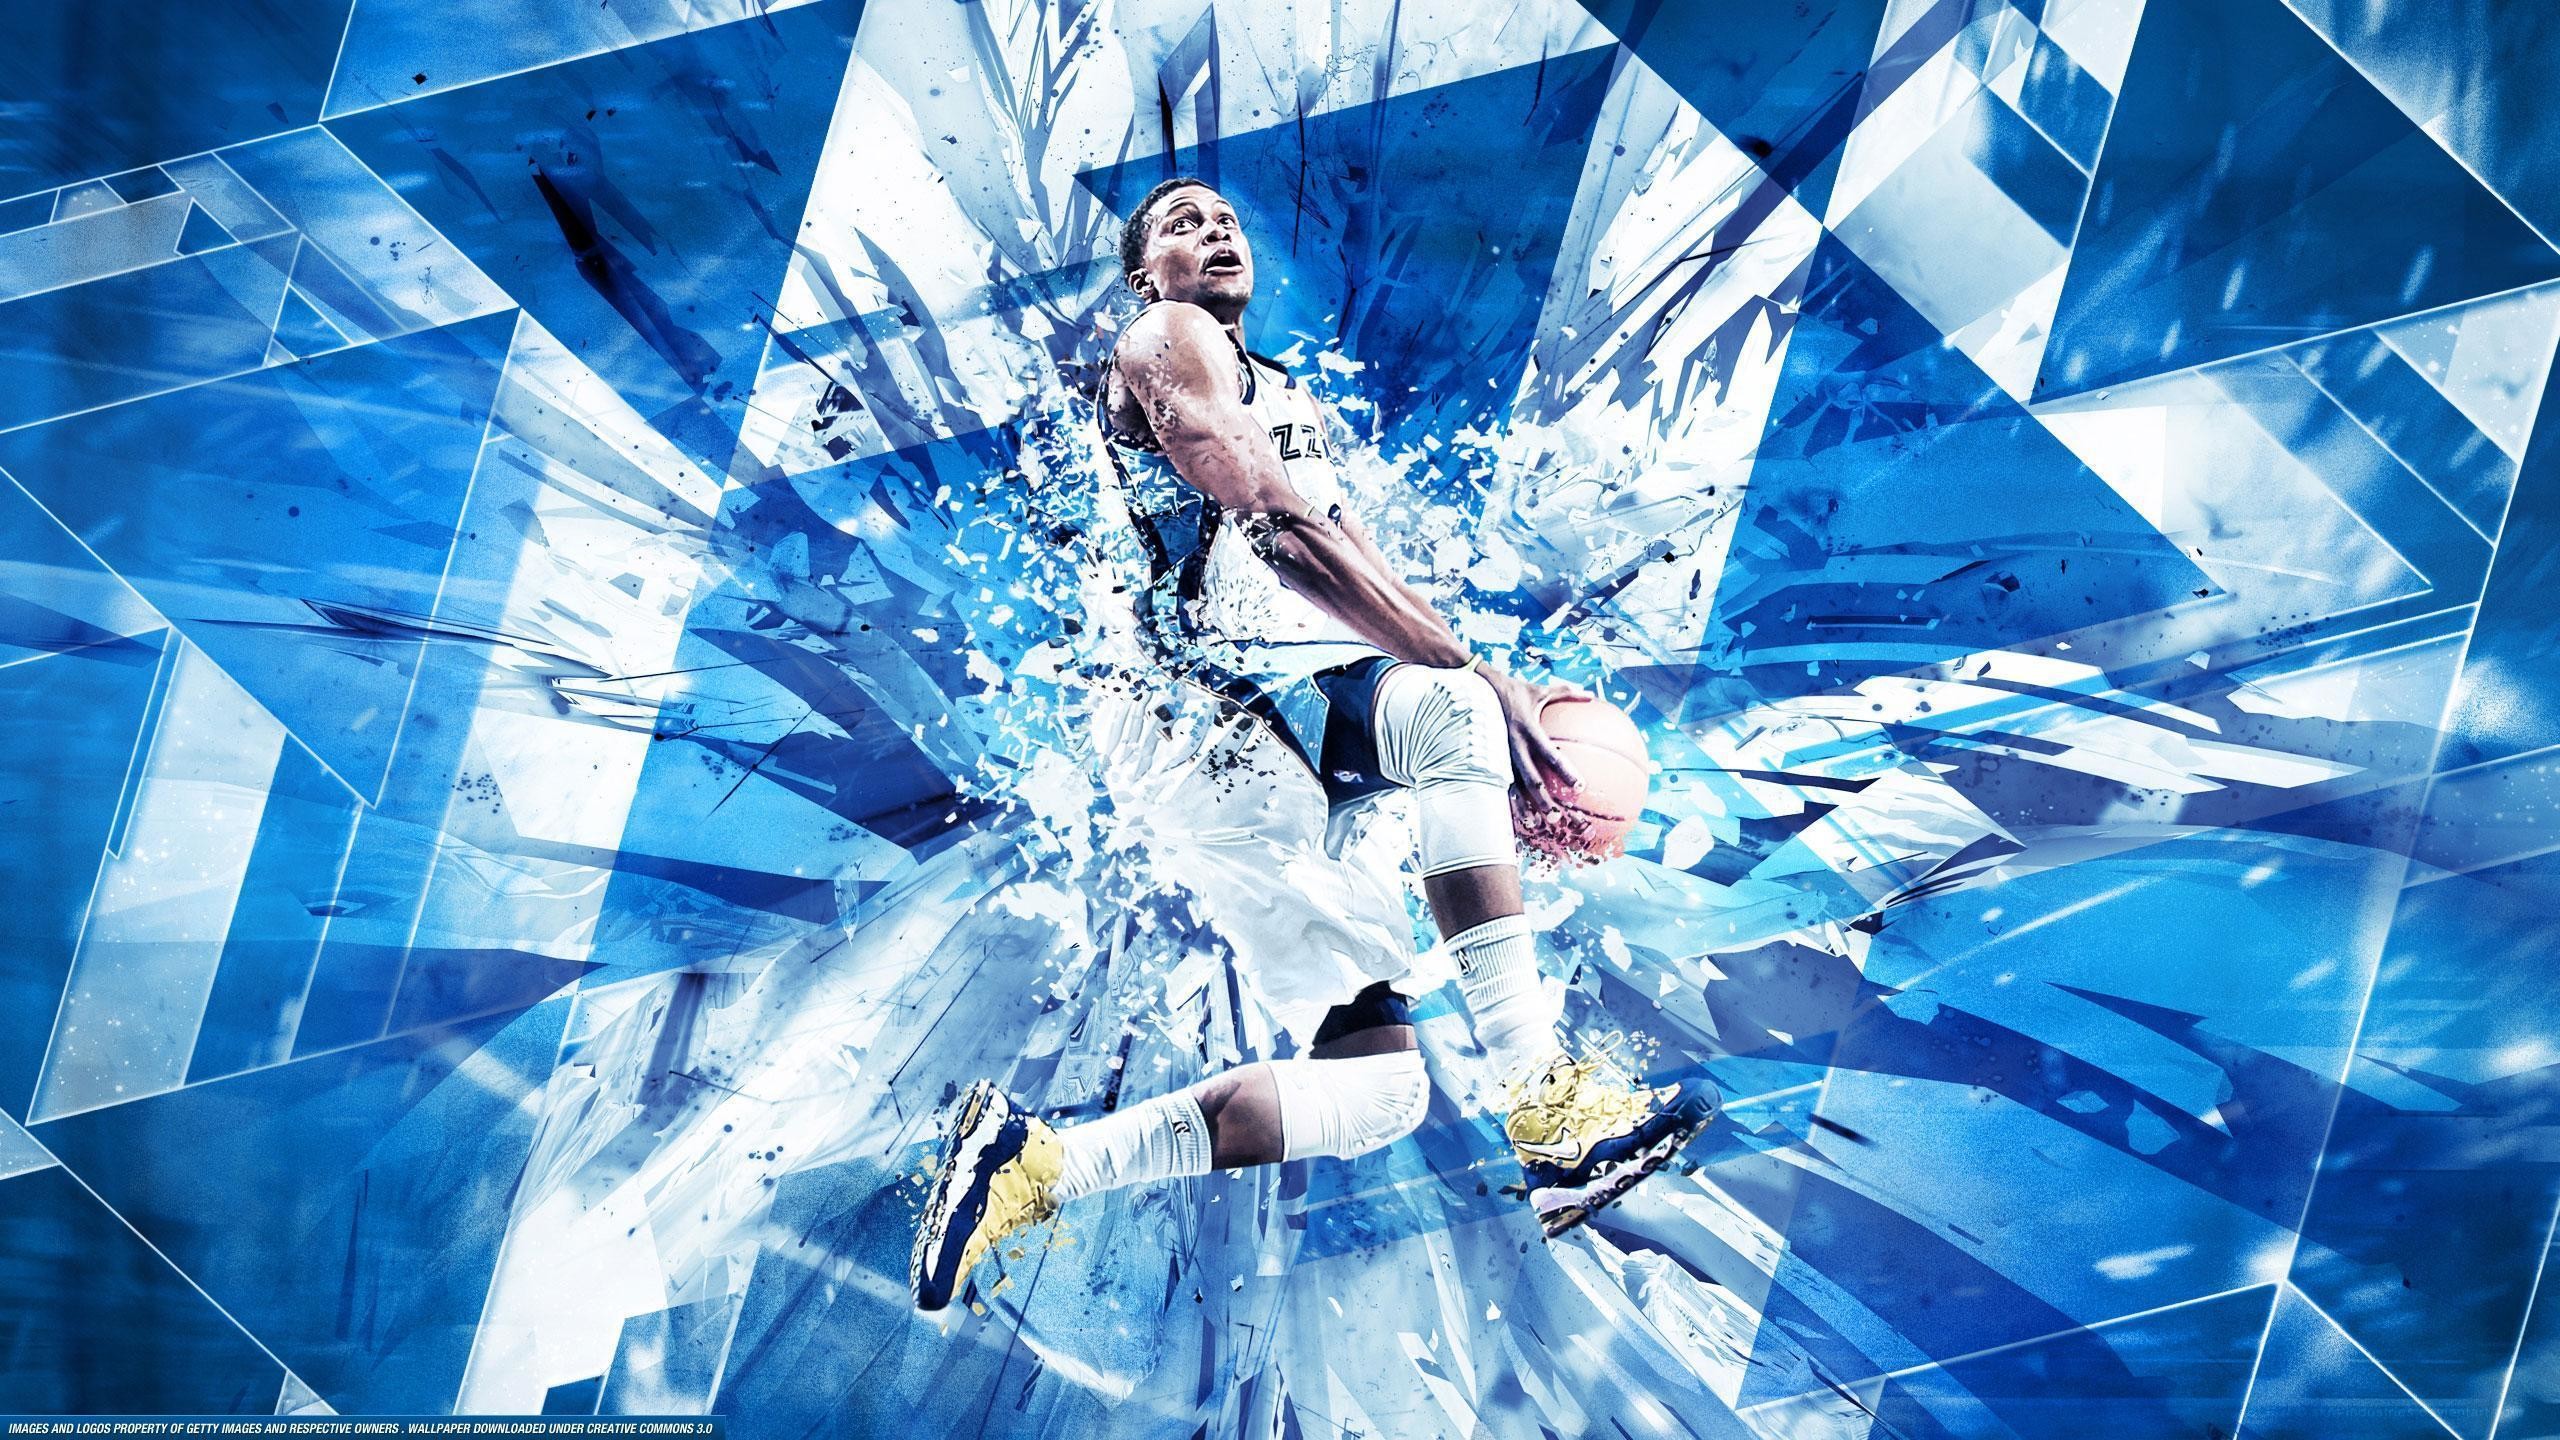 2560x1440 Memphis Grizzlies Wallpapers | Basketball Wallpapers at .